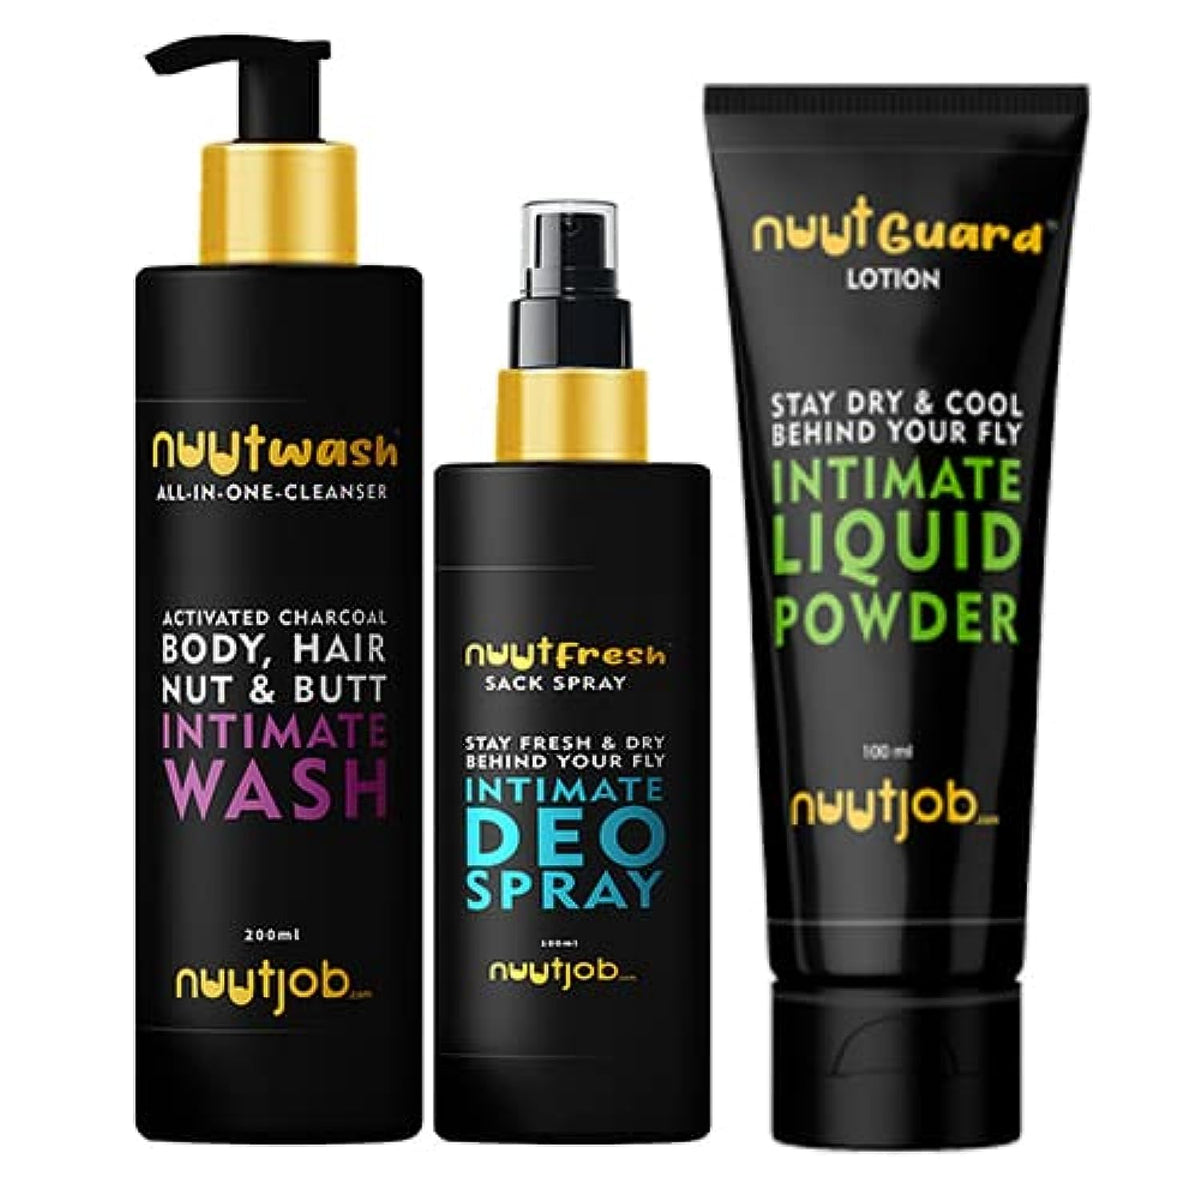 Nuutjob Men's Intimate Grooming and Hygiene 400ml Combo Pack of Intimate Wash, Liquid Powder and Intimate Deo Spray